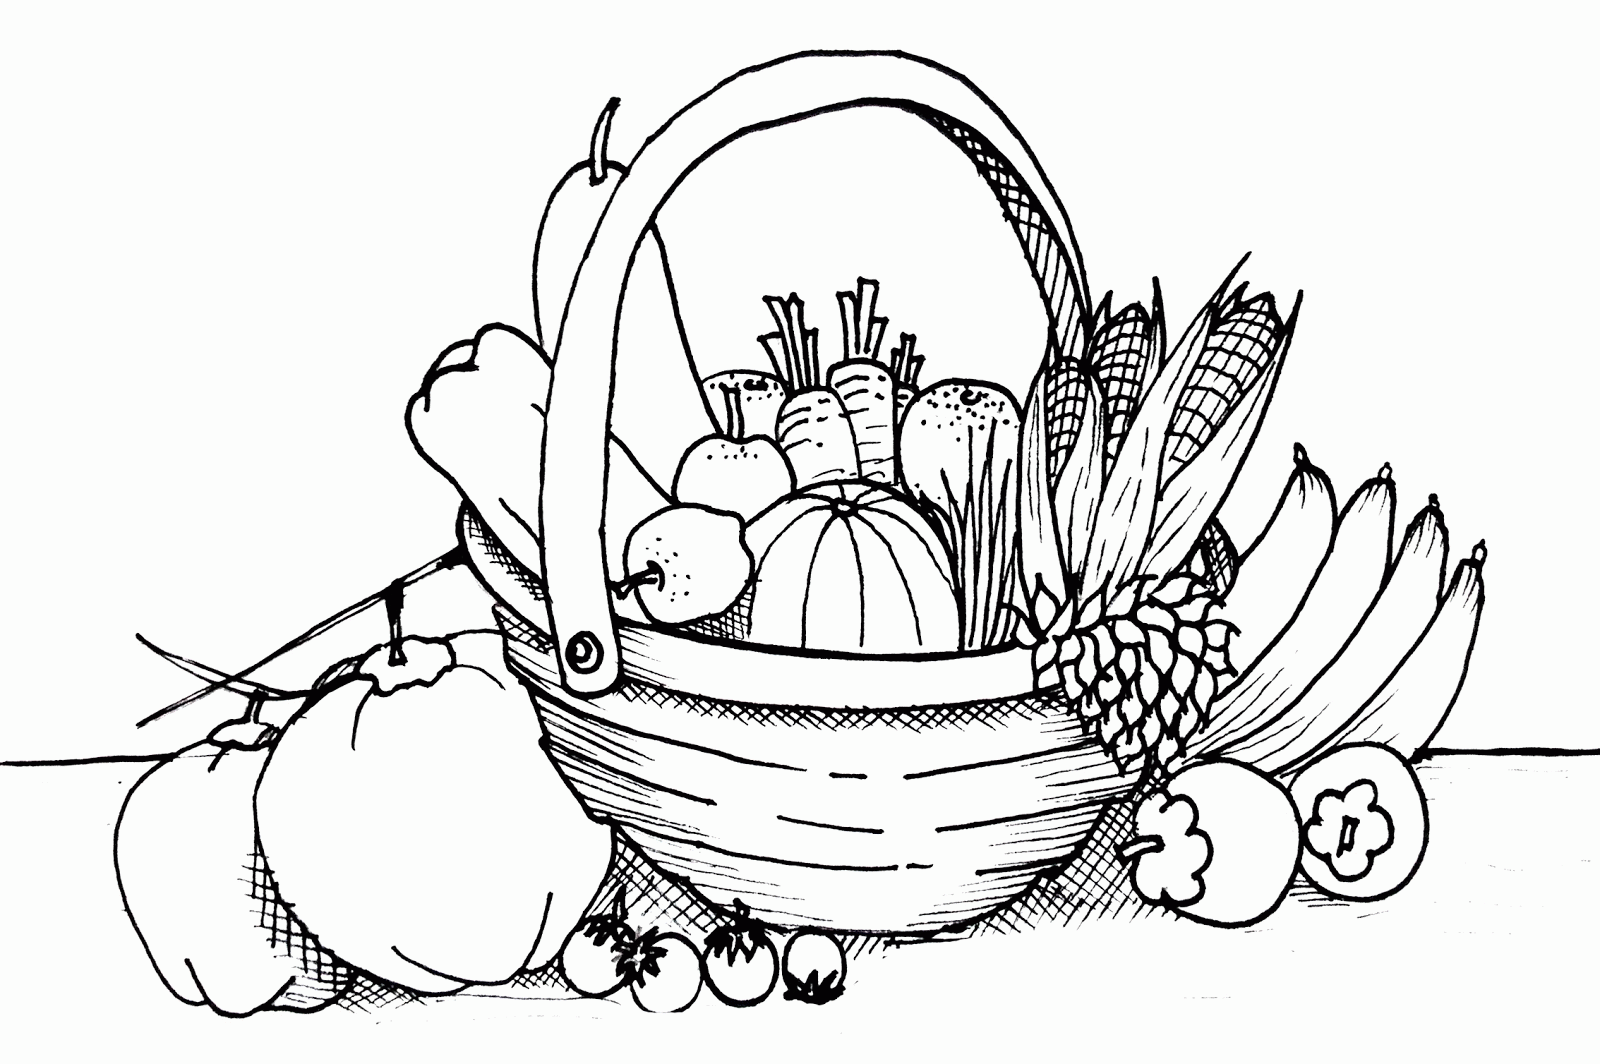 Free Fruits And Vegetables Coloring Pages Print, Download Free Fruits